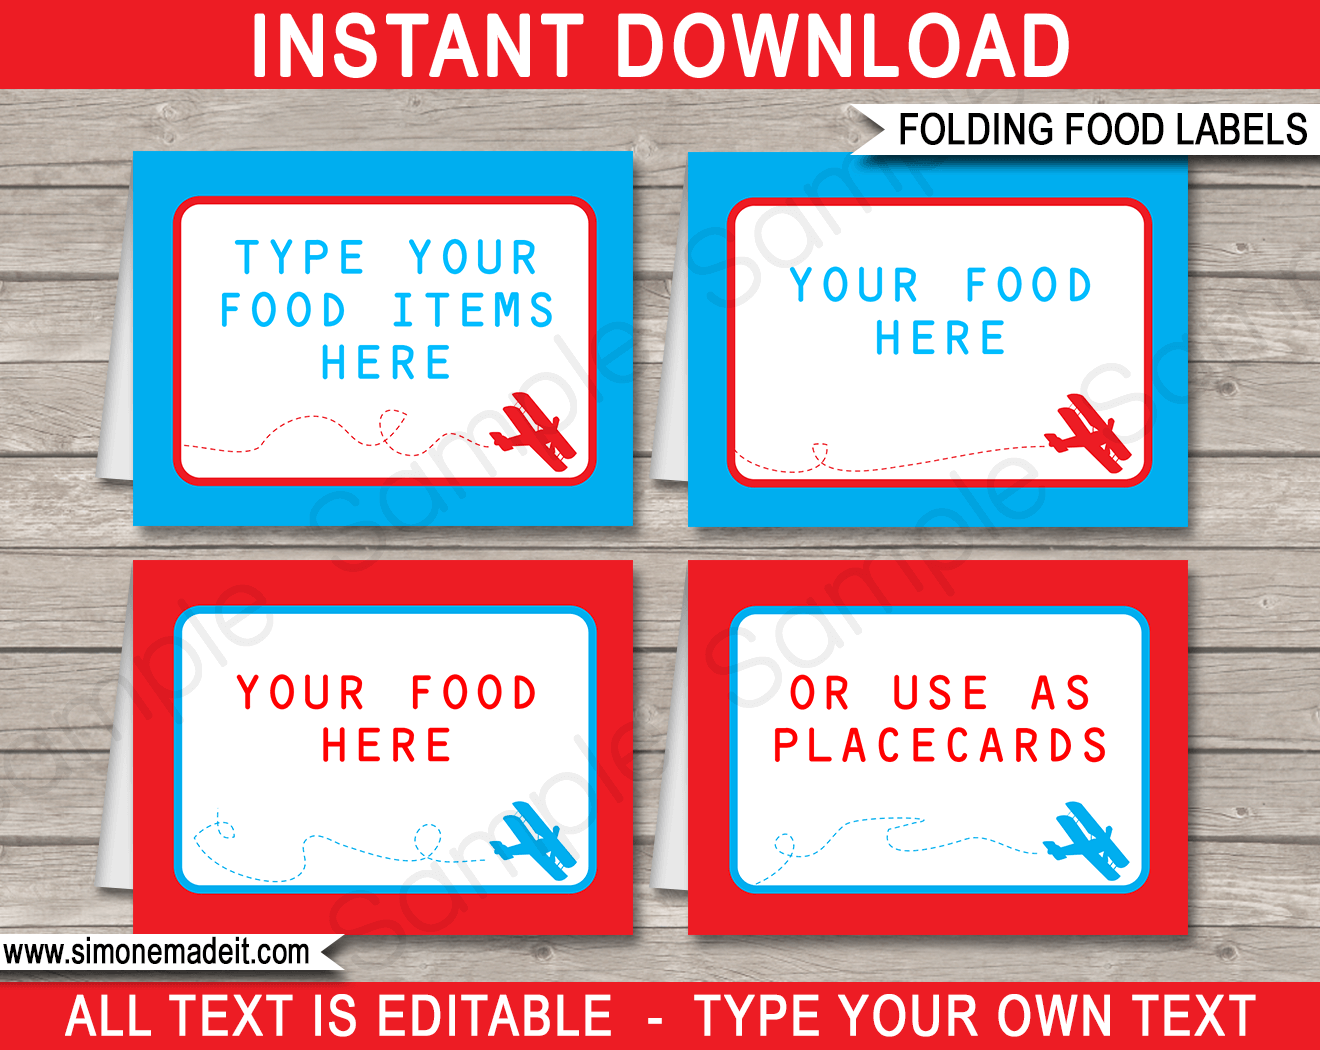 Airplane Birthday Party Food Labels | Food Buffet Tags | Place Cards | Editable DIY Template | $3.00 INSTANT DOWNLOAD via SIMONEmadeit.com